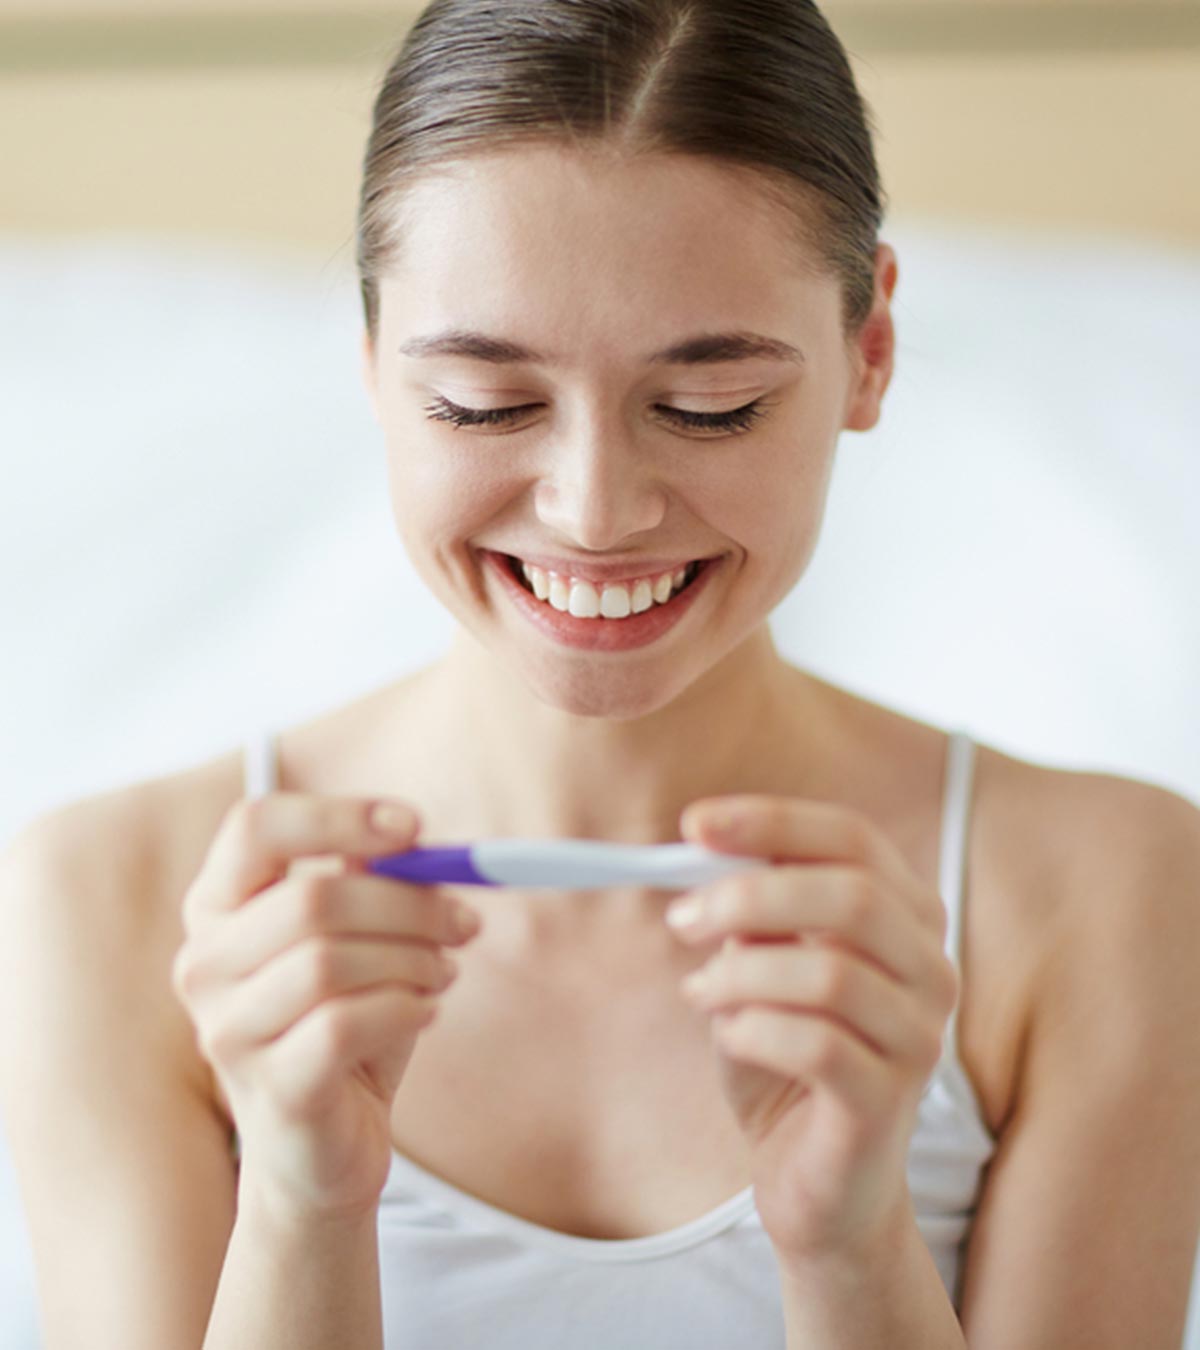 What To Make Of The Dreaded Faint Line On A Pregnancy Test